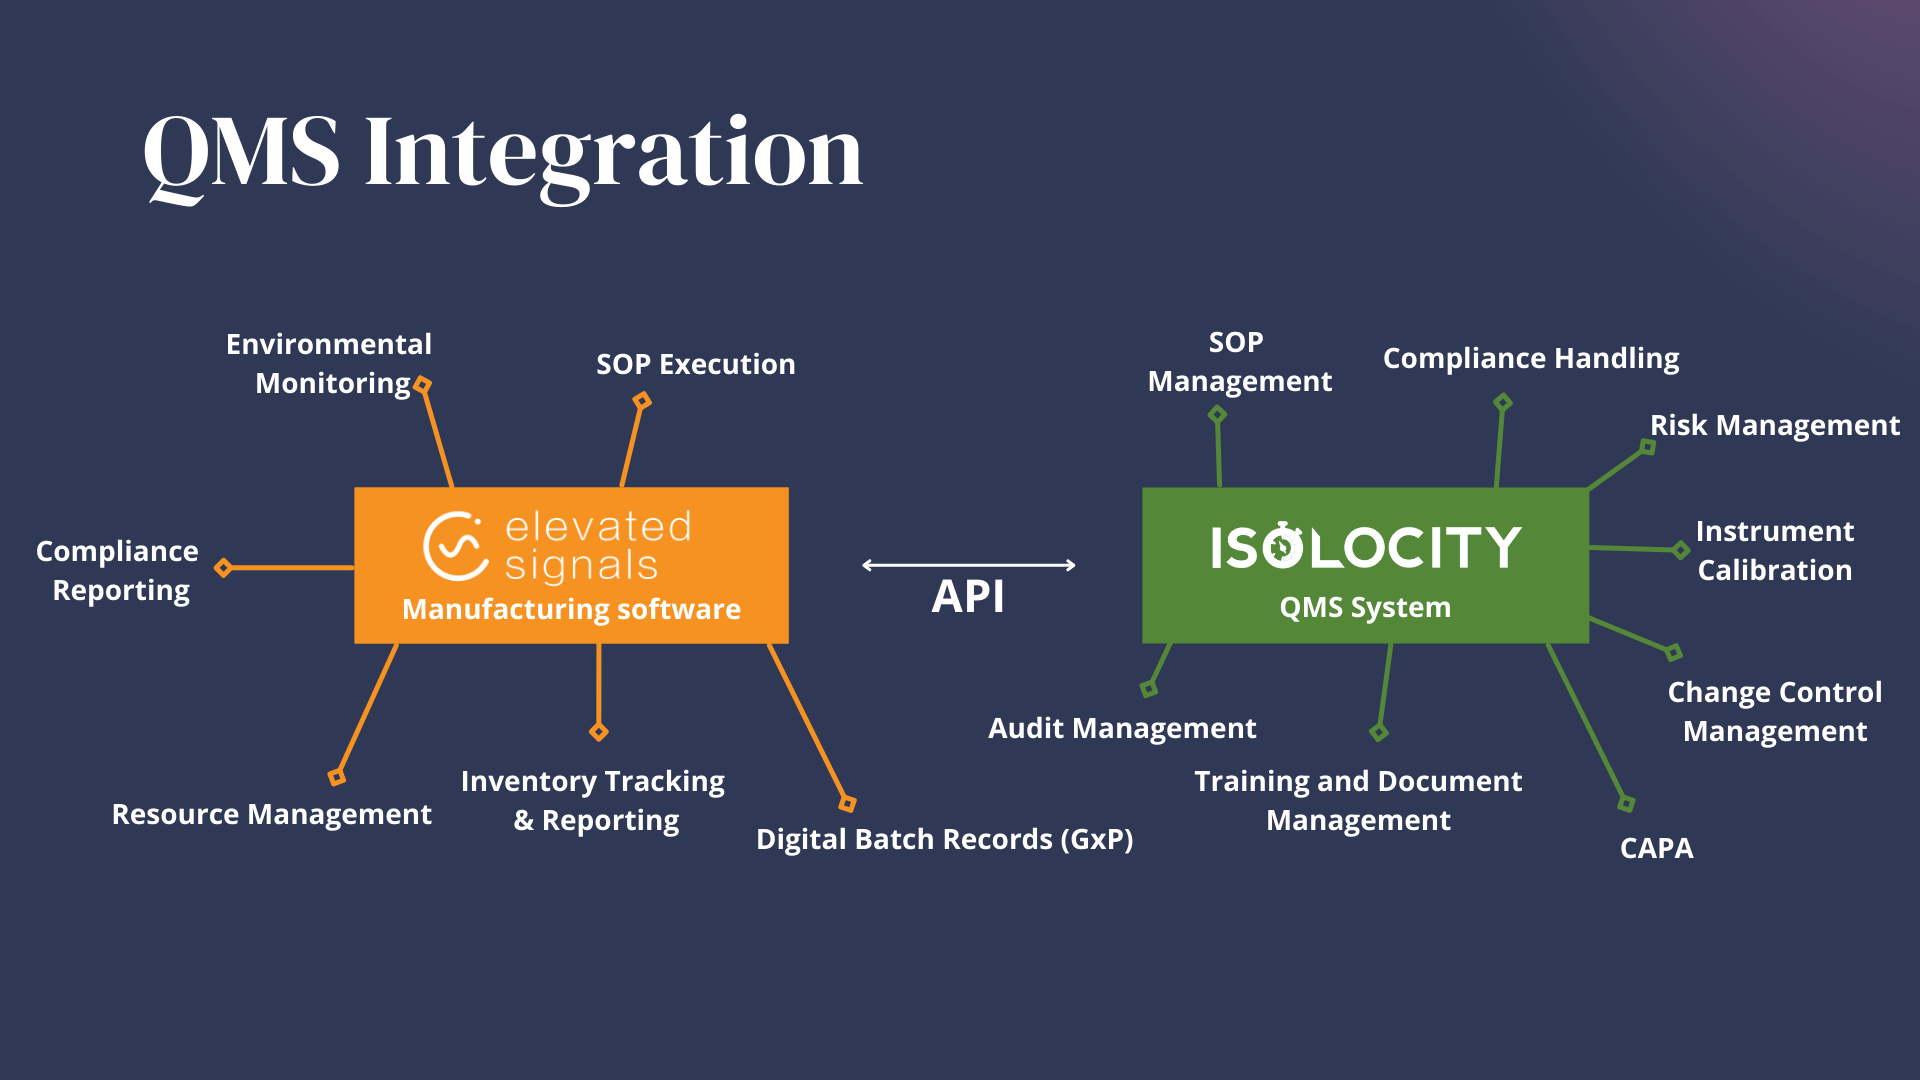 Isolocity and Elevated Signals API